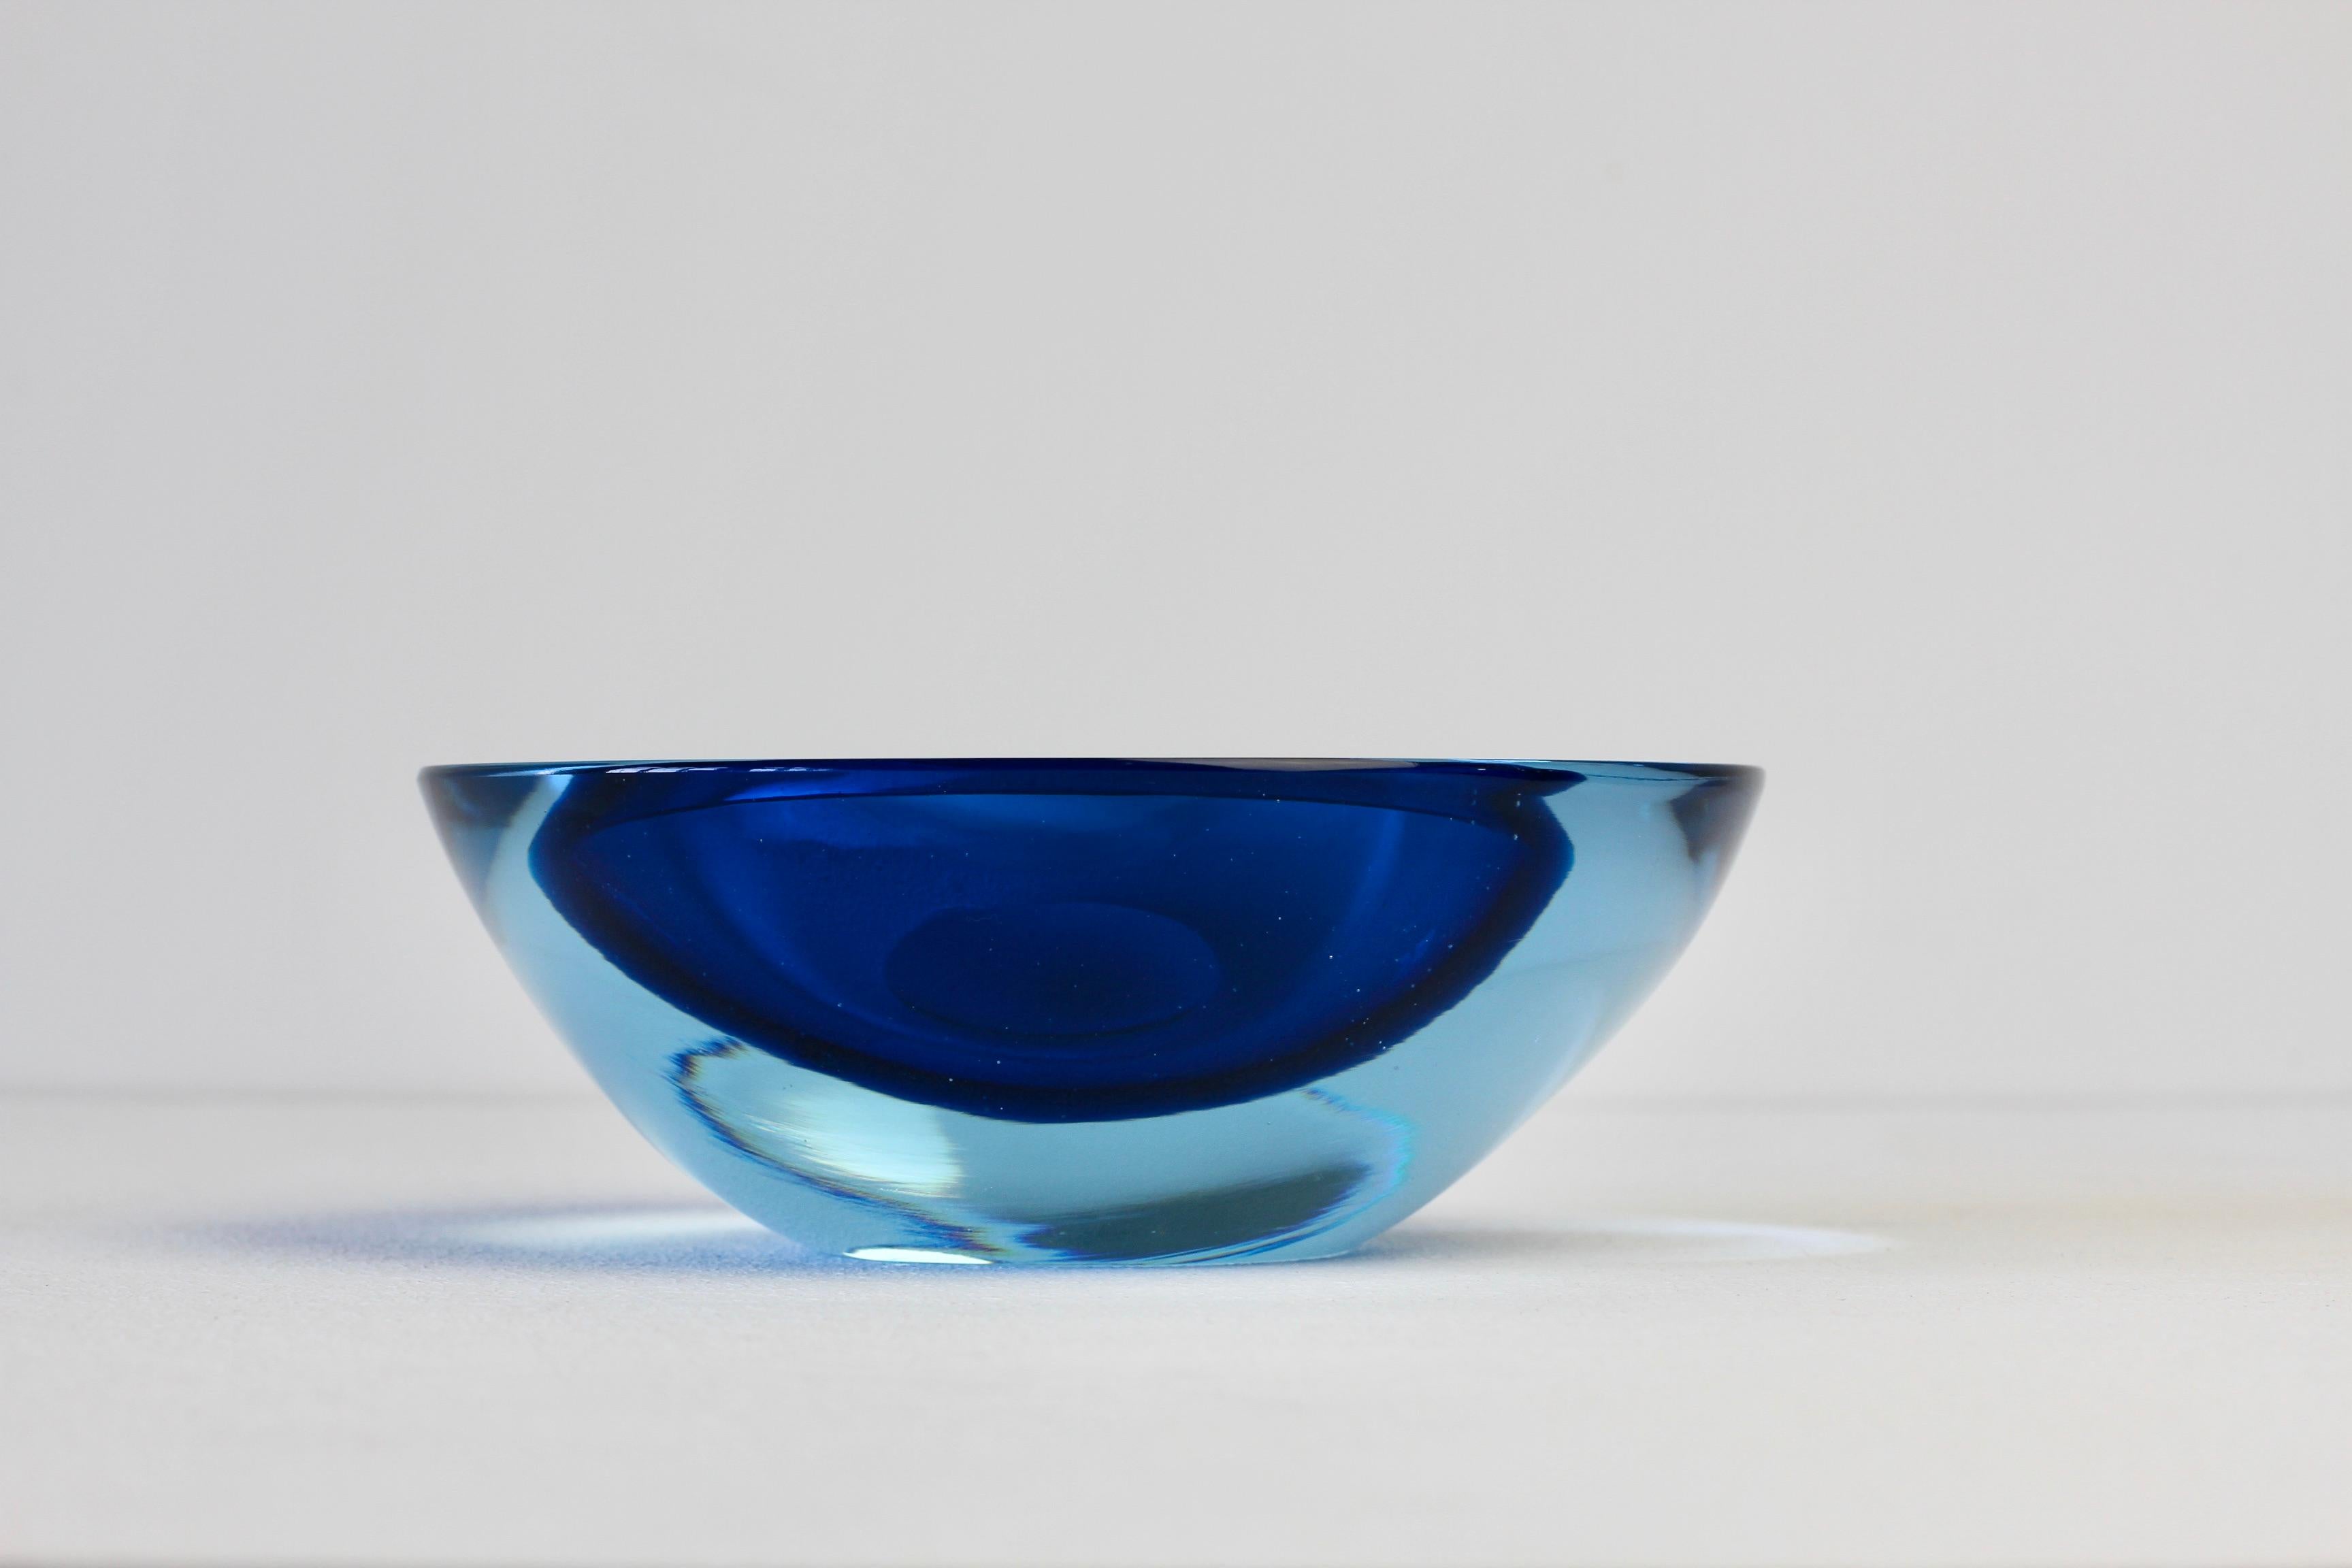 Antonio da Ros (attributed) for Cenedese large & heavy vintage Italian Murano glass bowl, serving dish or ashtray, circa 1965-1975. Utilizing the Sommerso technique this large, heavy piece of glass features an asymmetric design of blue over light